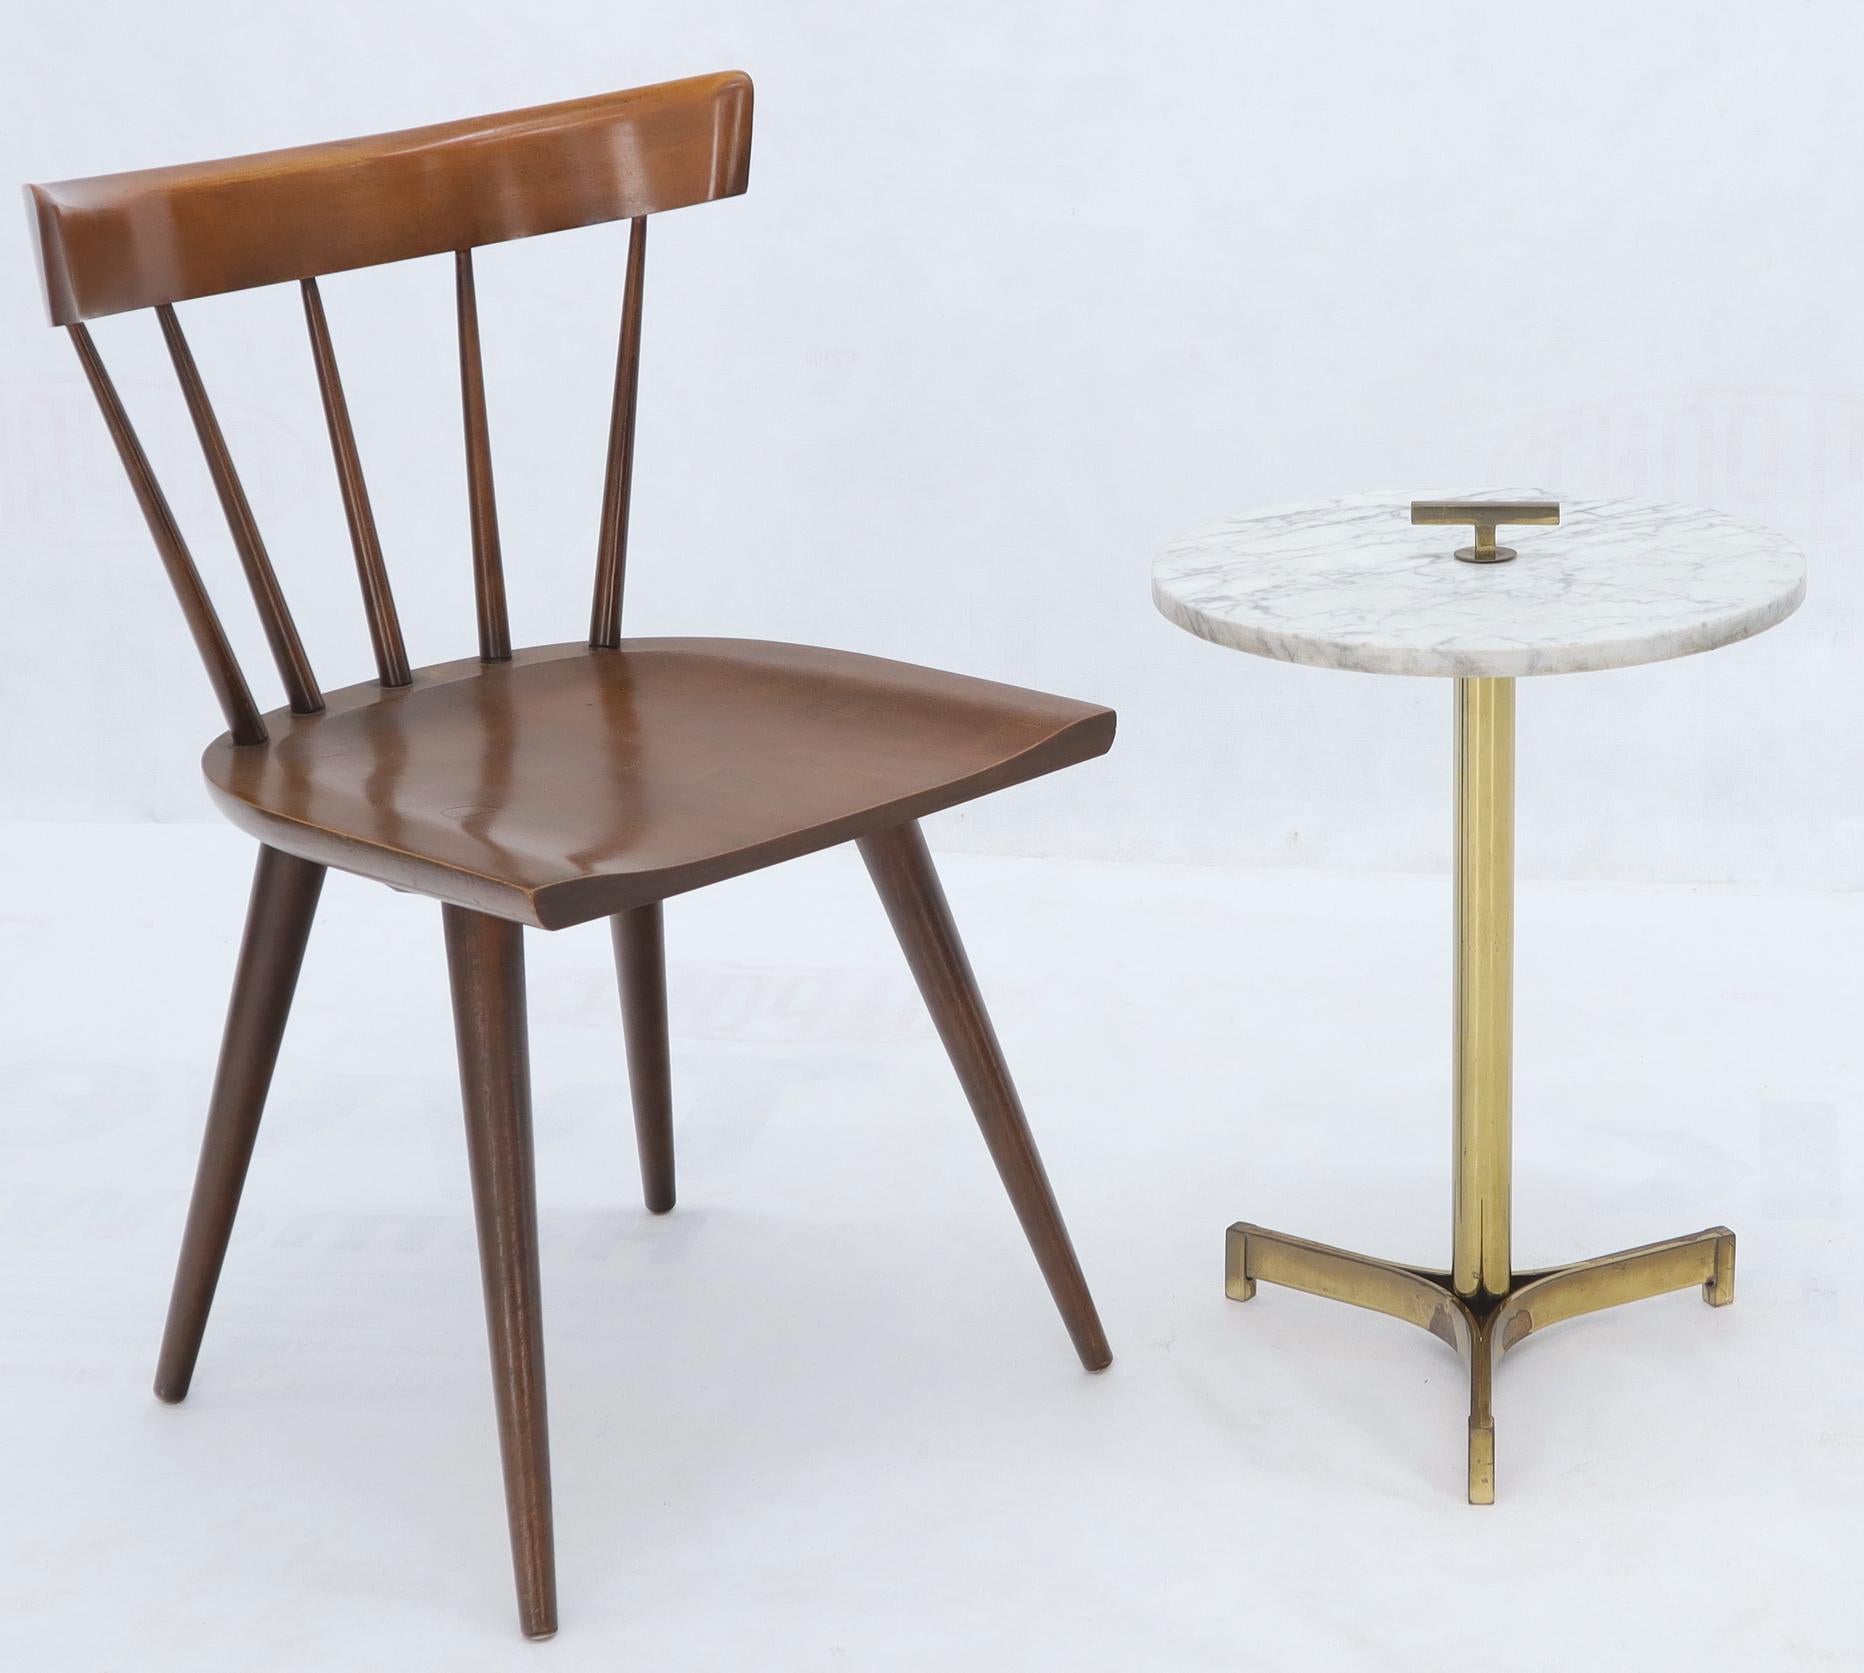 Mid-Century Modern solid brass or bronze base occasional side table with carry handle attribute to Parzinger.